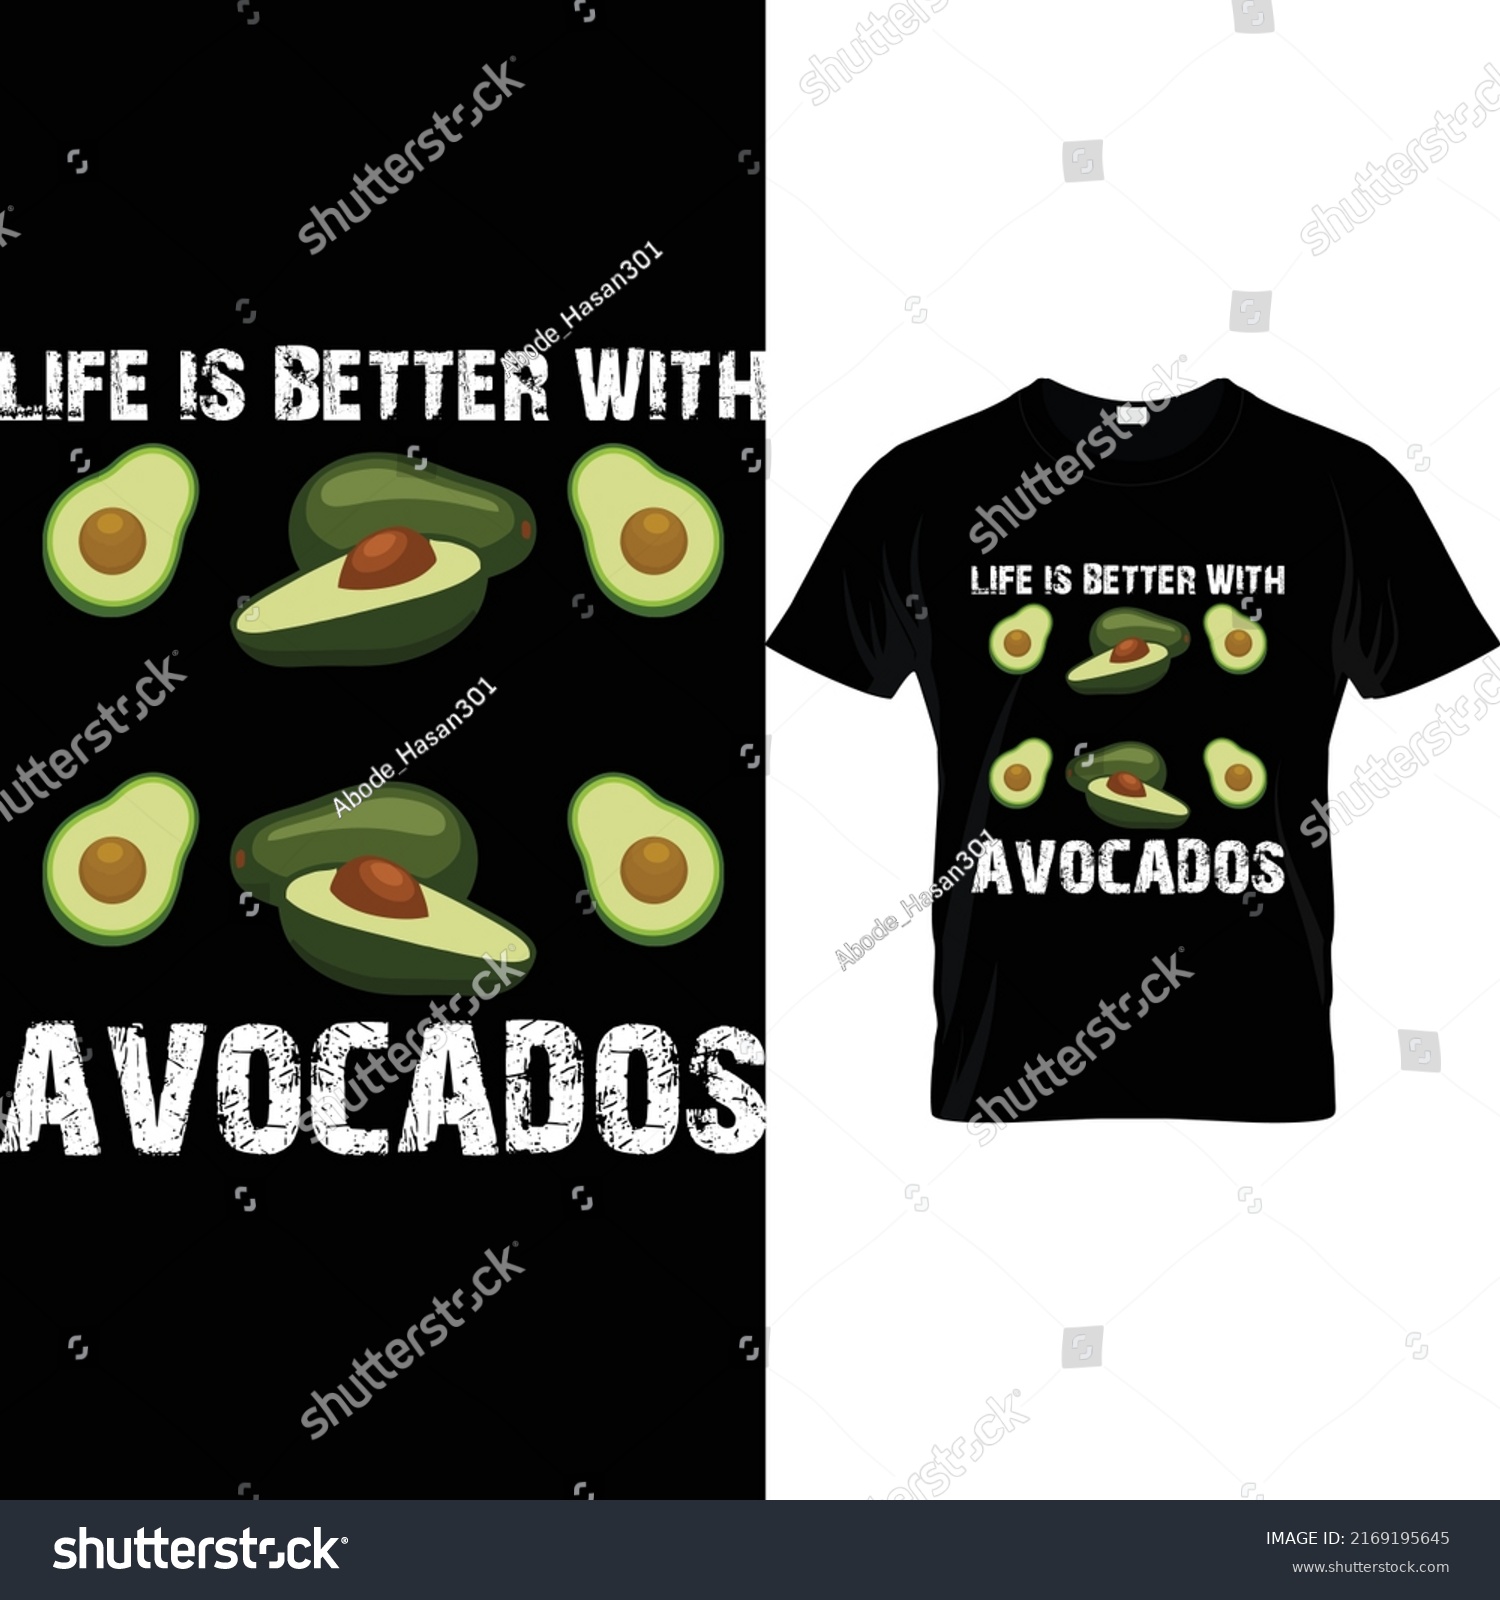 SVG of life is better with avocados t shirt design svg